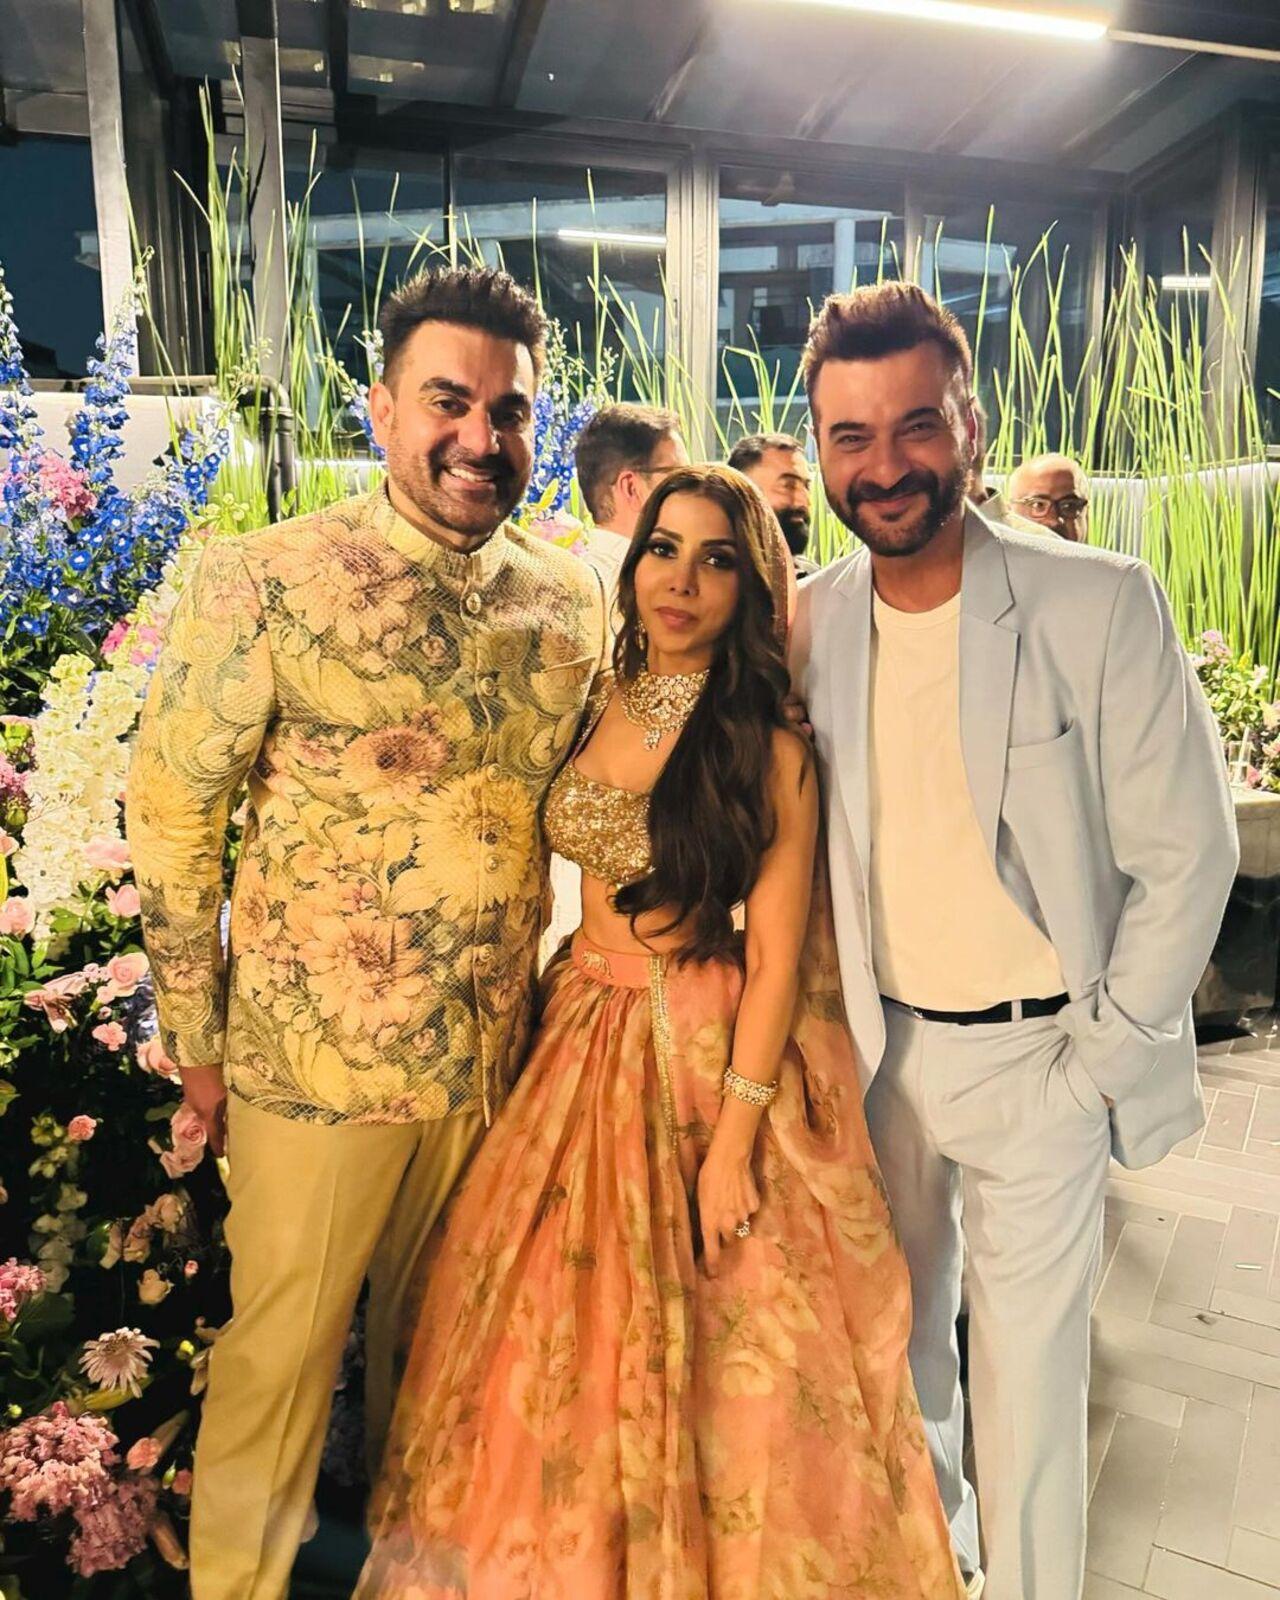 Sanjay Kapoor shared this picture on social media congratulating the couple